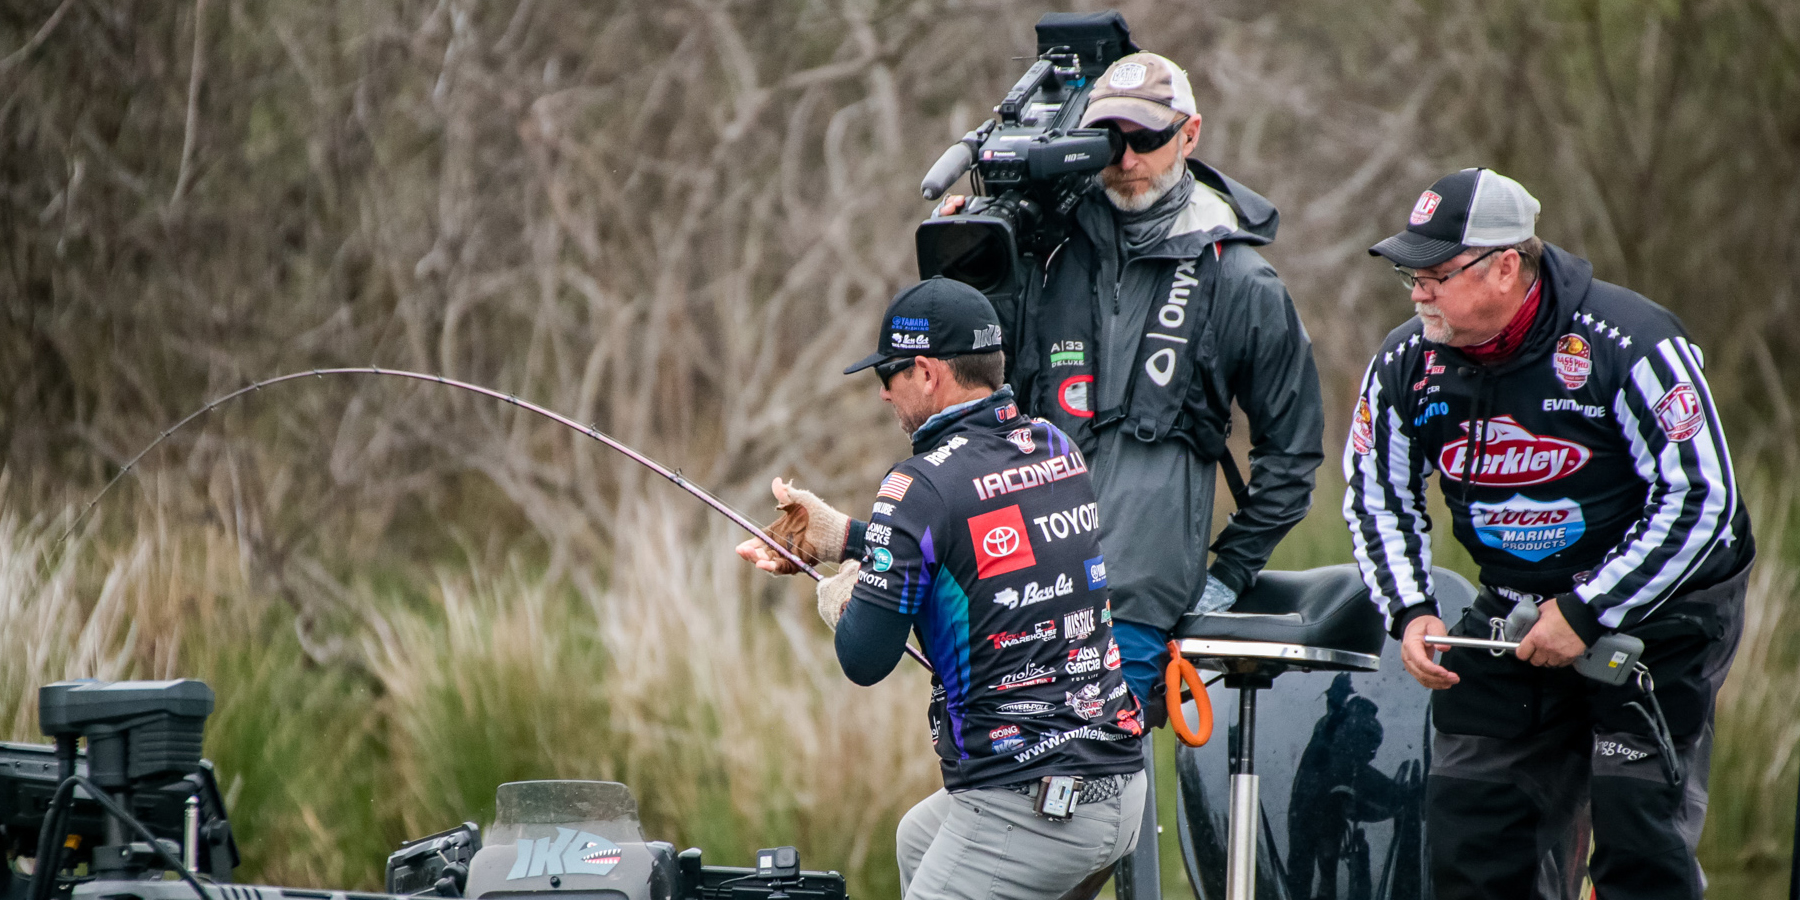 Mike Iaconelli Casting Spinning Tackle at Shoreline Cover Fishing Photo